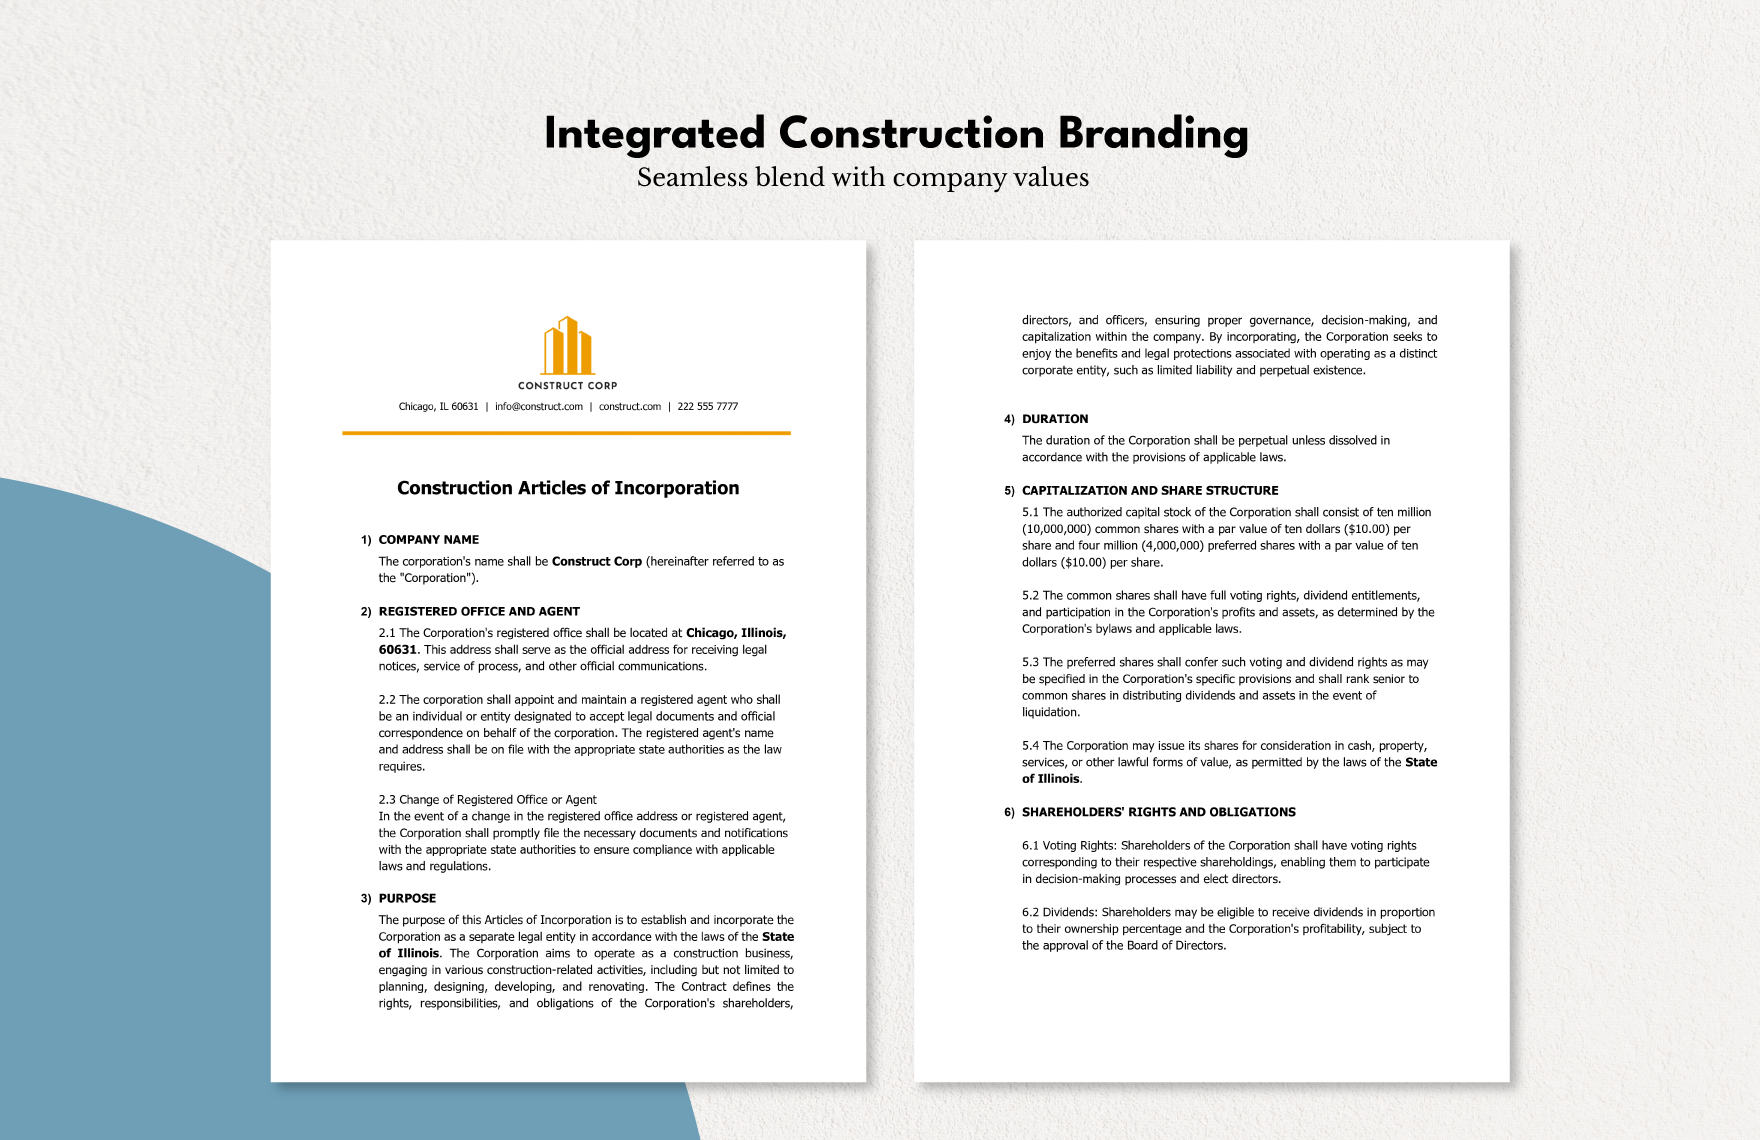 Construction Articles of Incorporation 